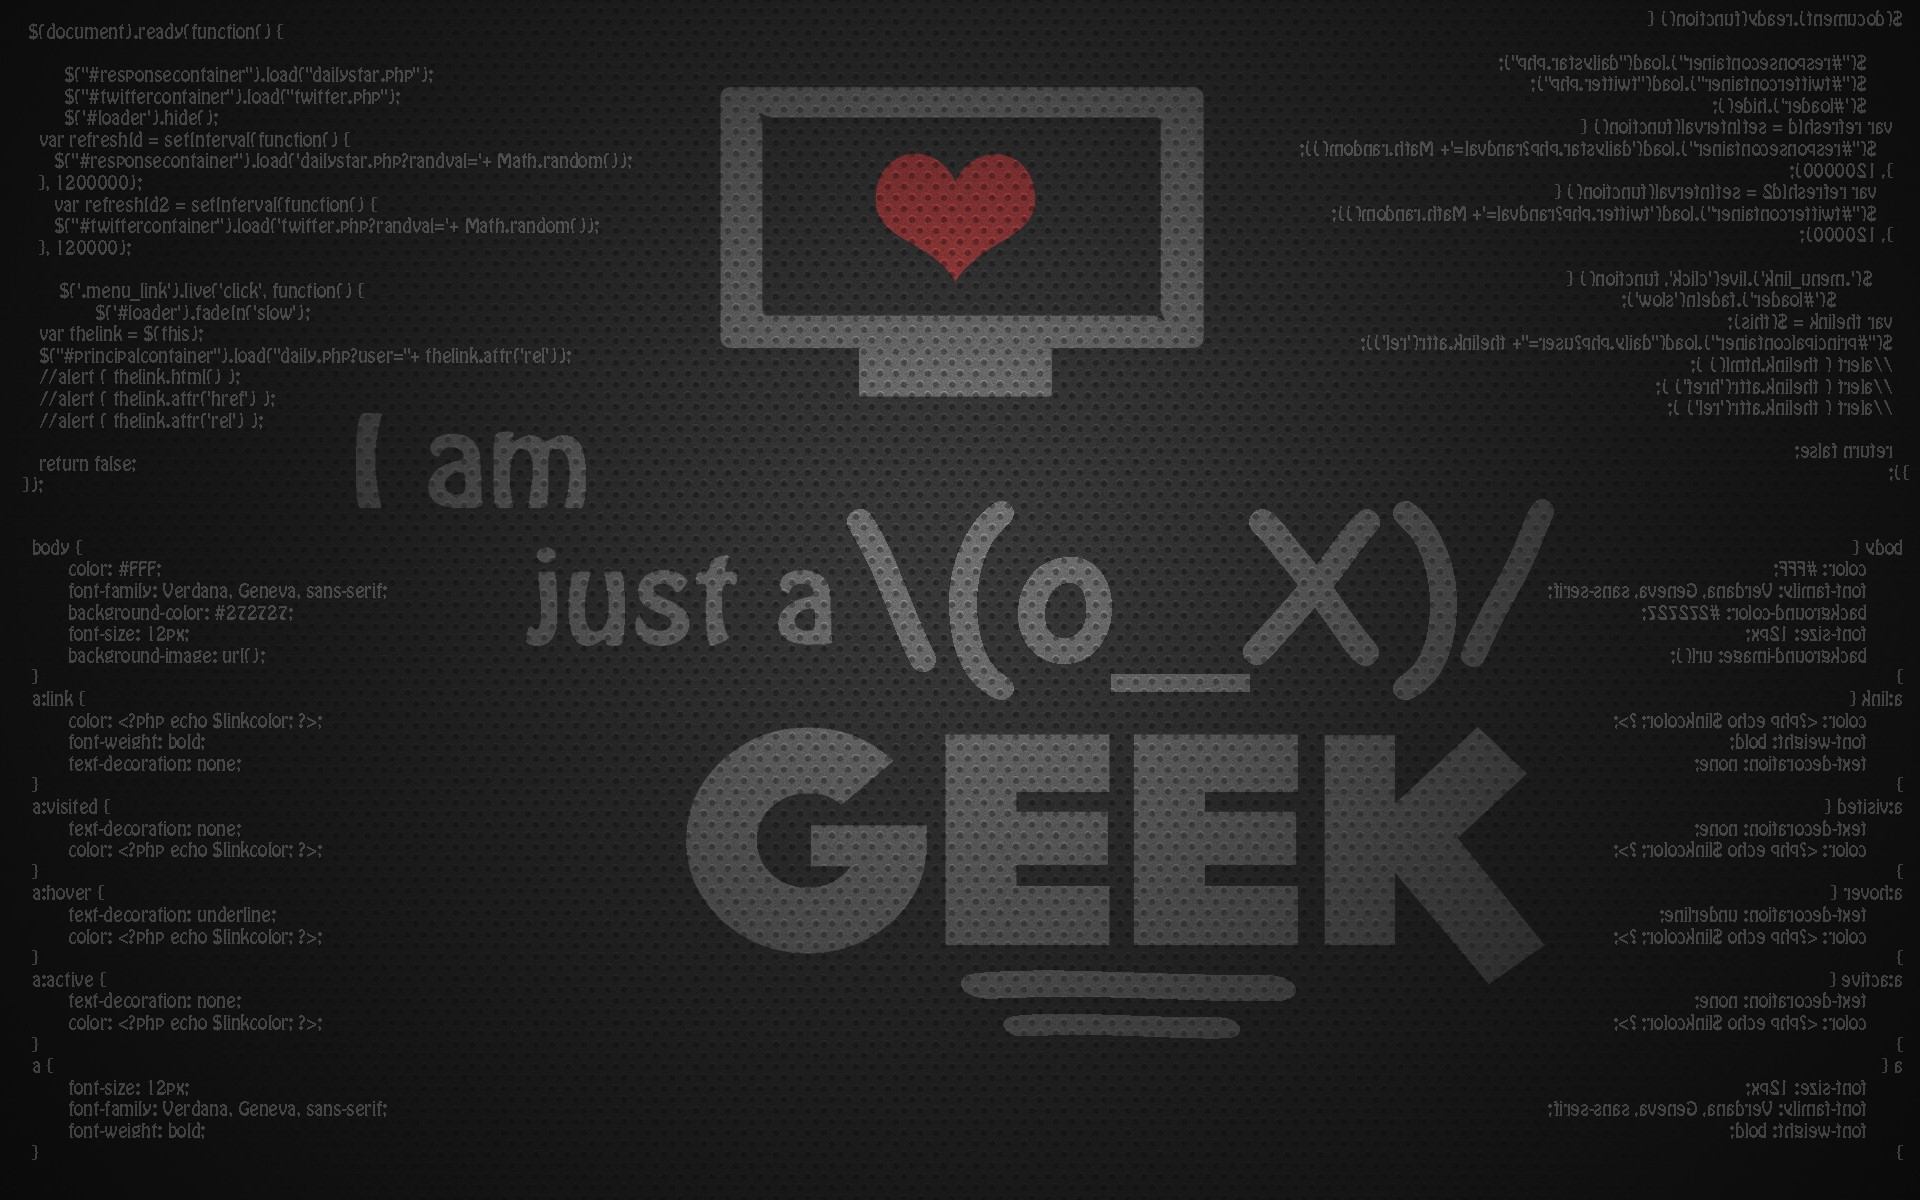 Wallpaper Of The Day Geek Image